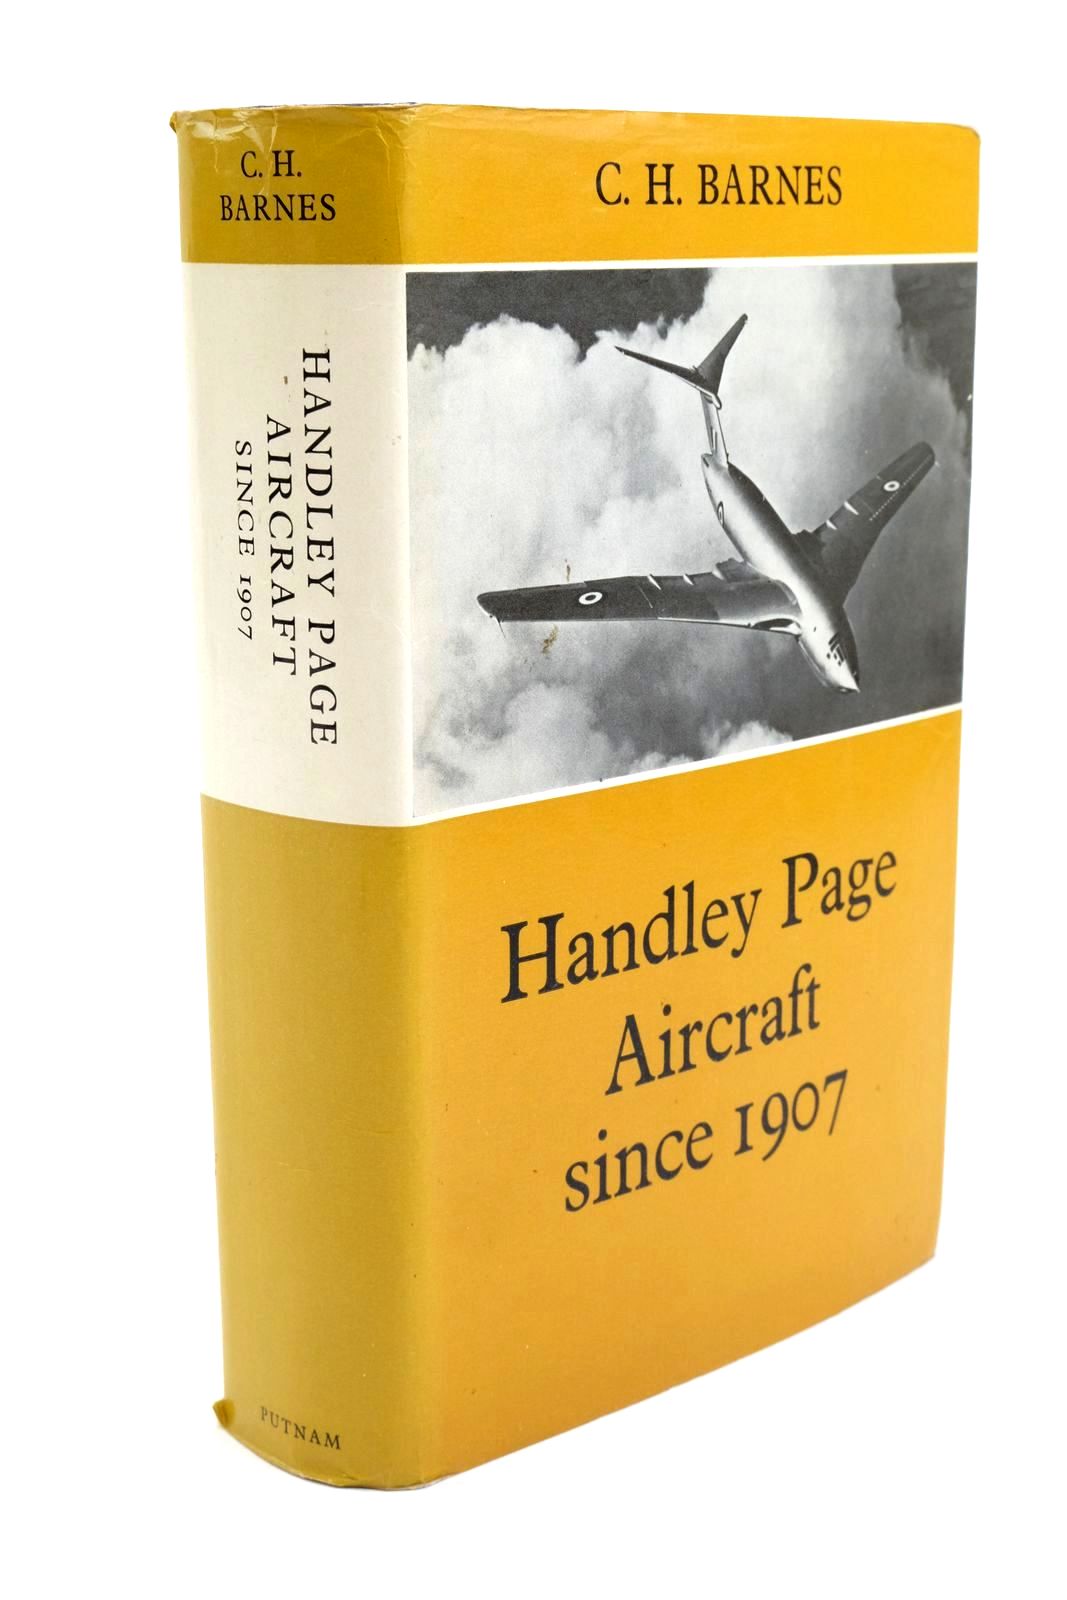 Photo of HANDLEY PAGE AIRCRAFT SINCE 1907 written by Barnes, C.H. published by Putnam (STOCK CODE: 1322009)  for sale by Stella & Rose's Books